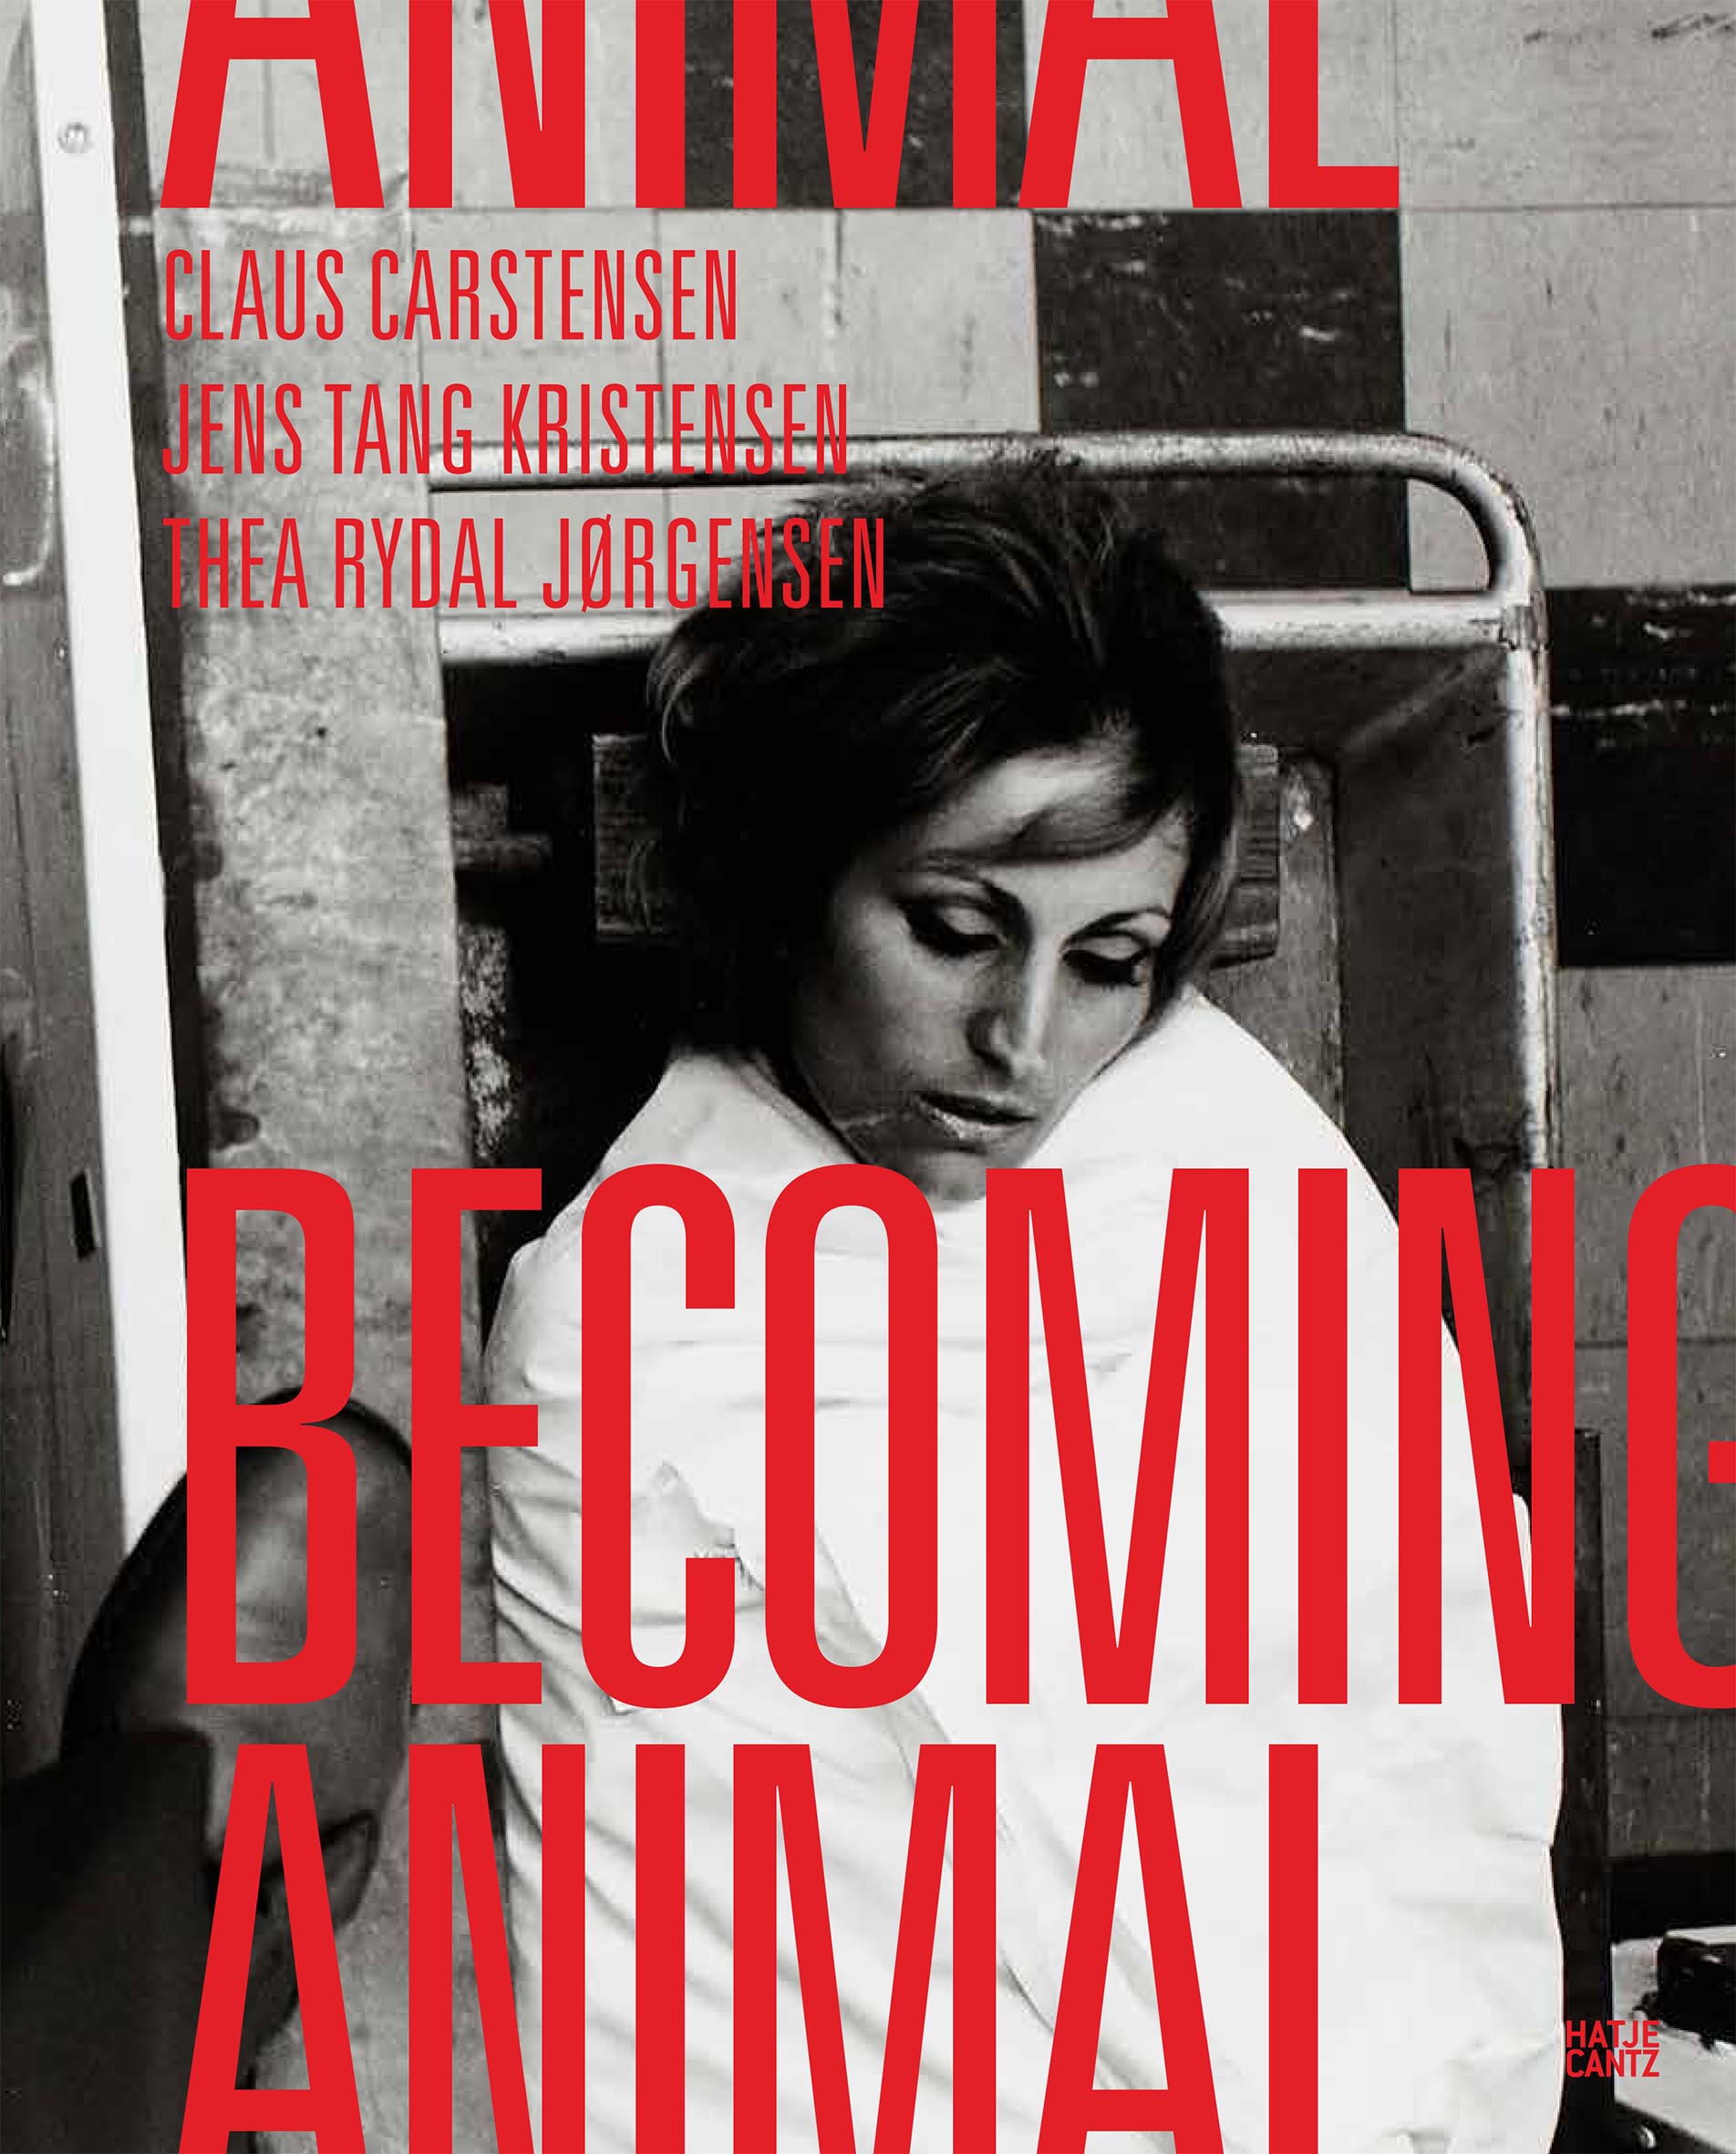 Becoming Animal © Cover Hatje Cantz